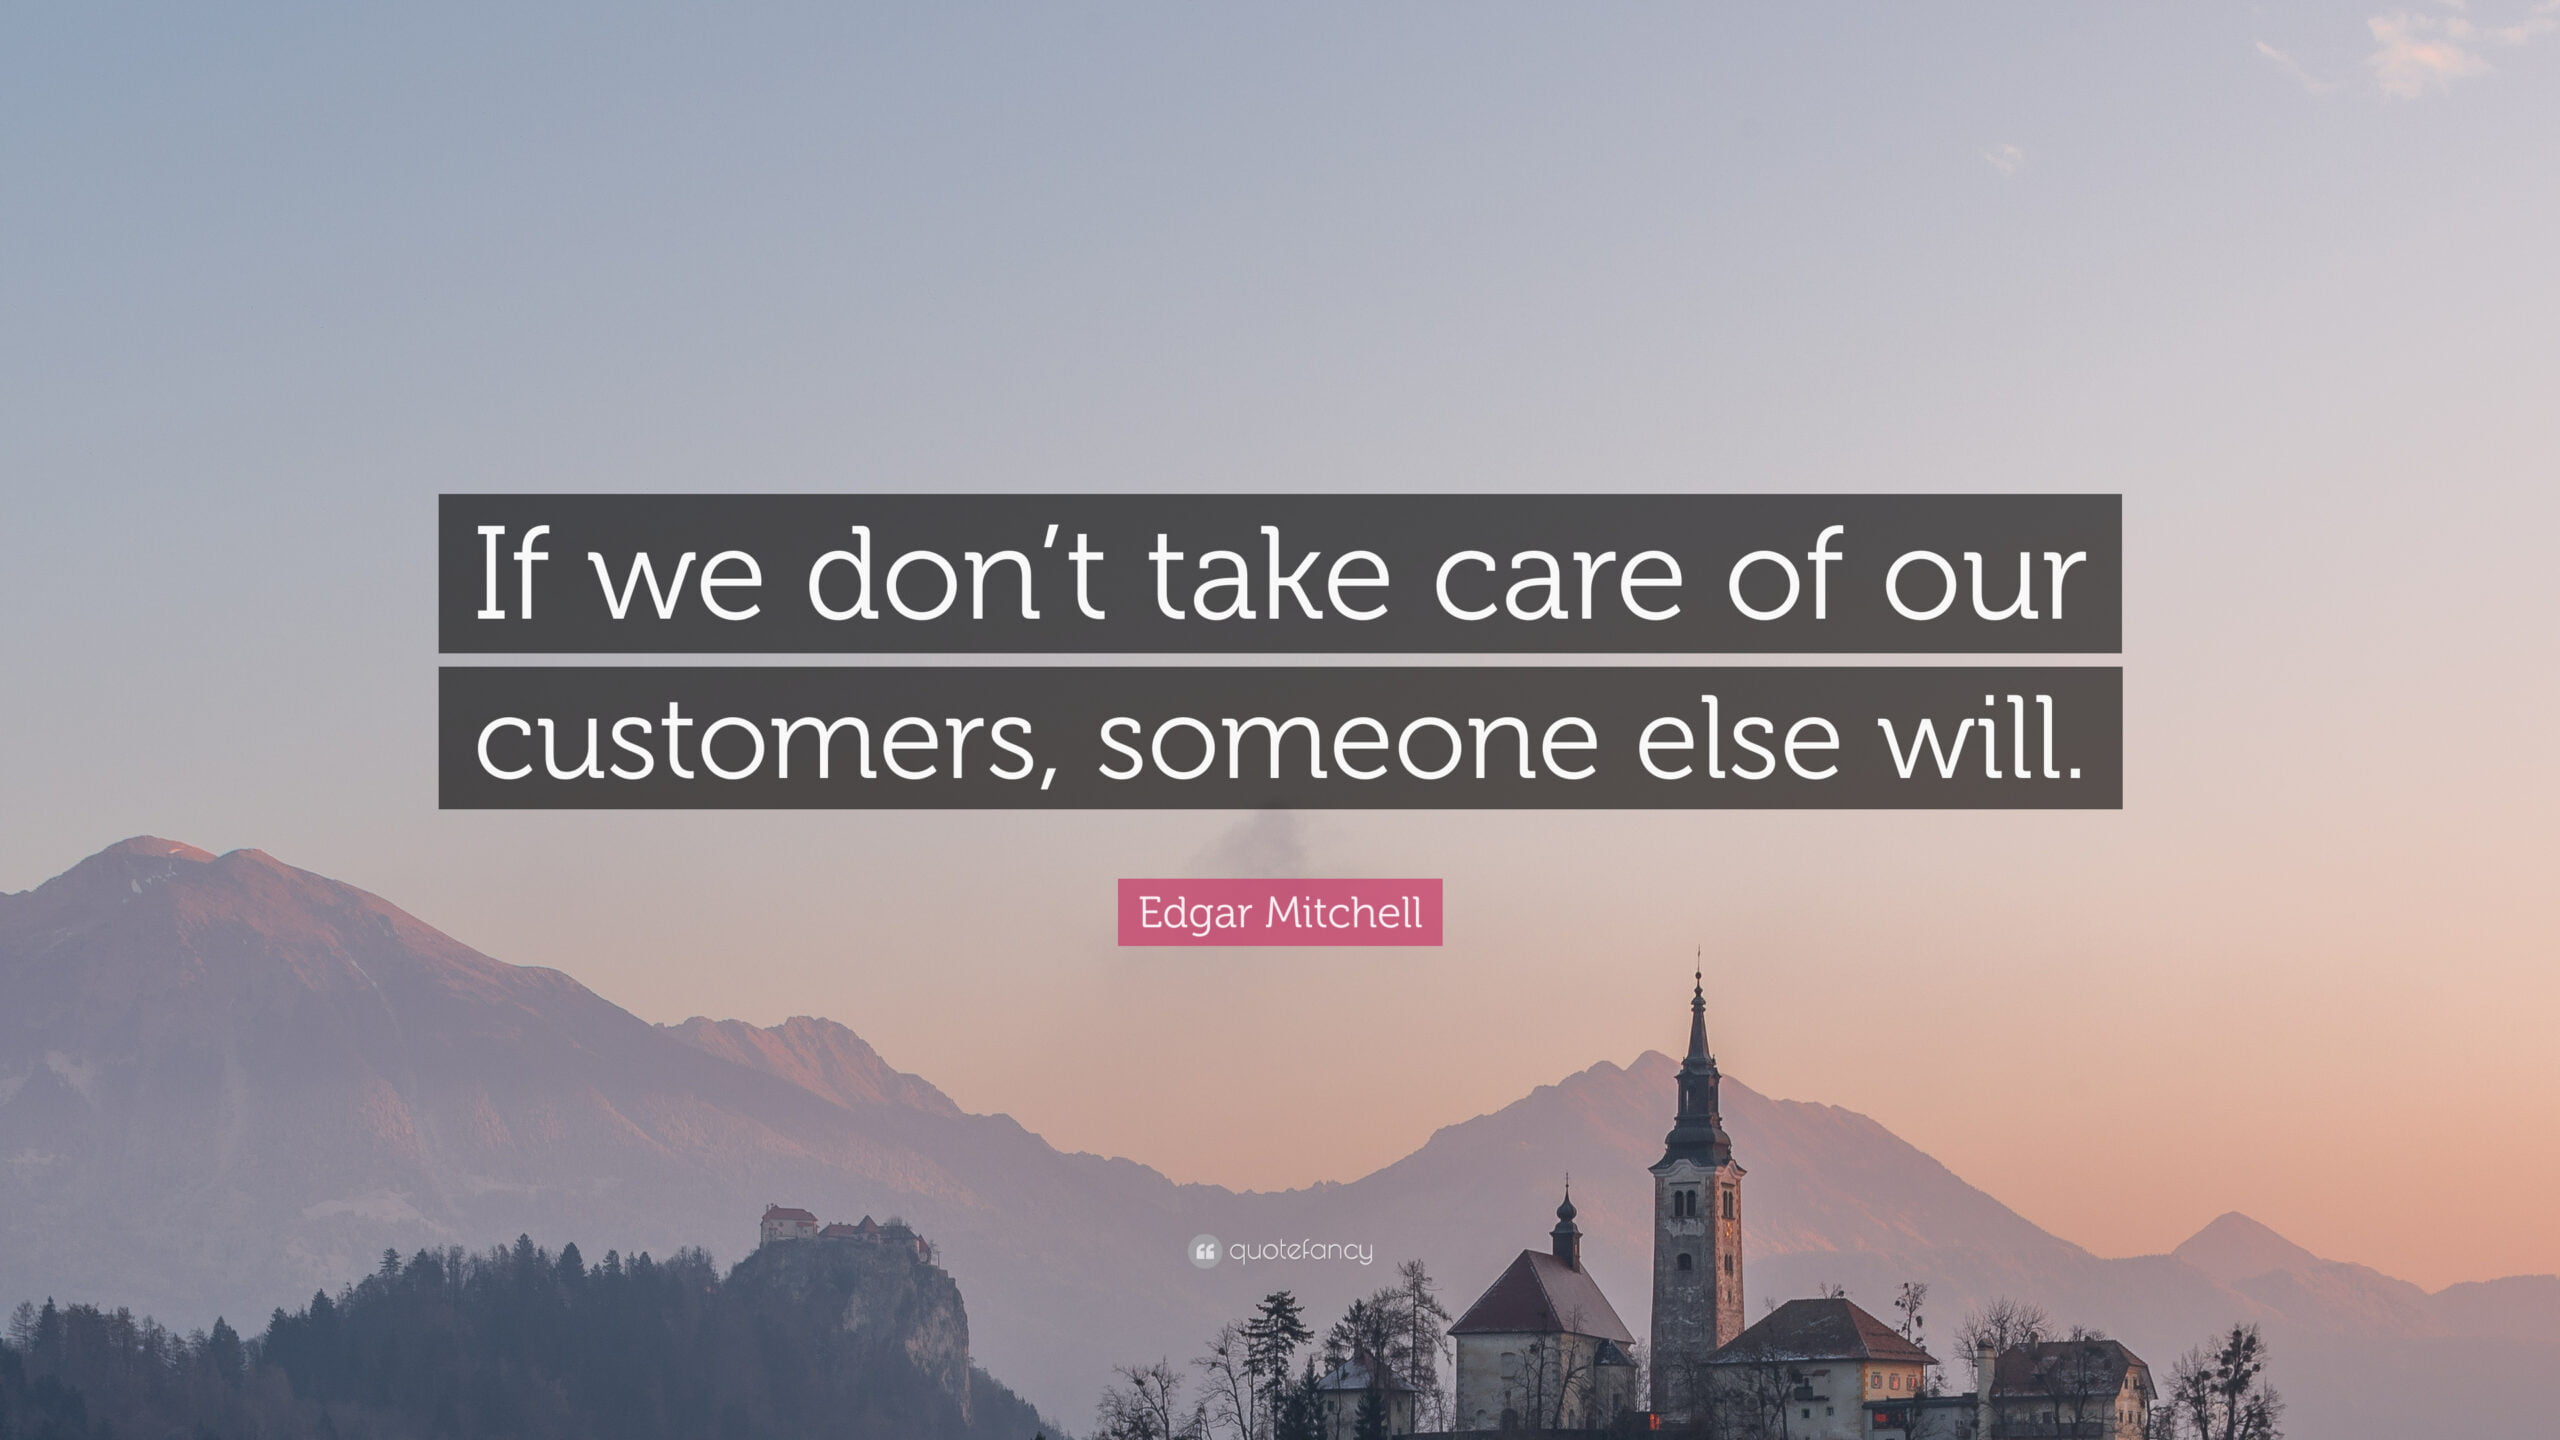 Text image on blue background saying "If we dont take care of our customers someone else will"